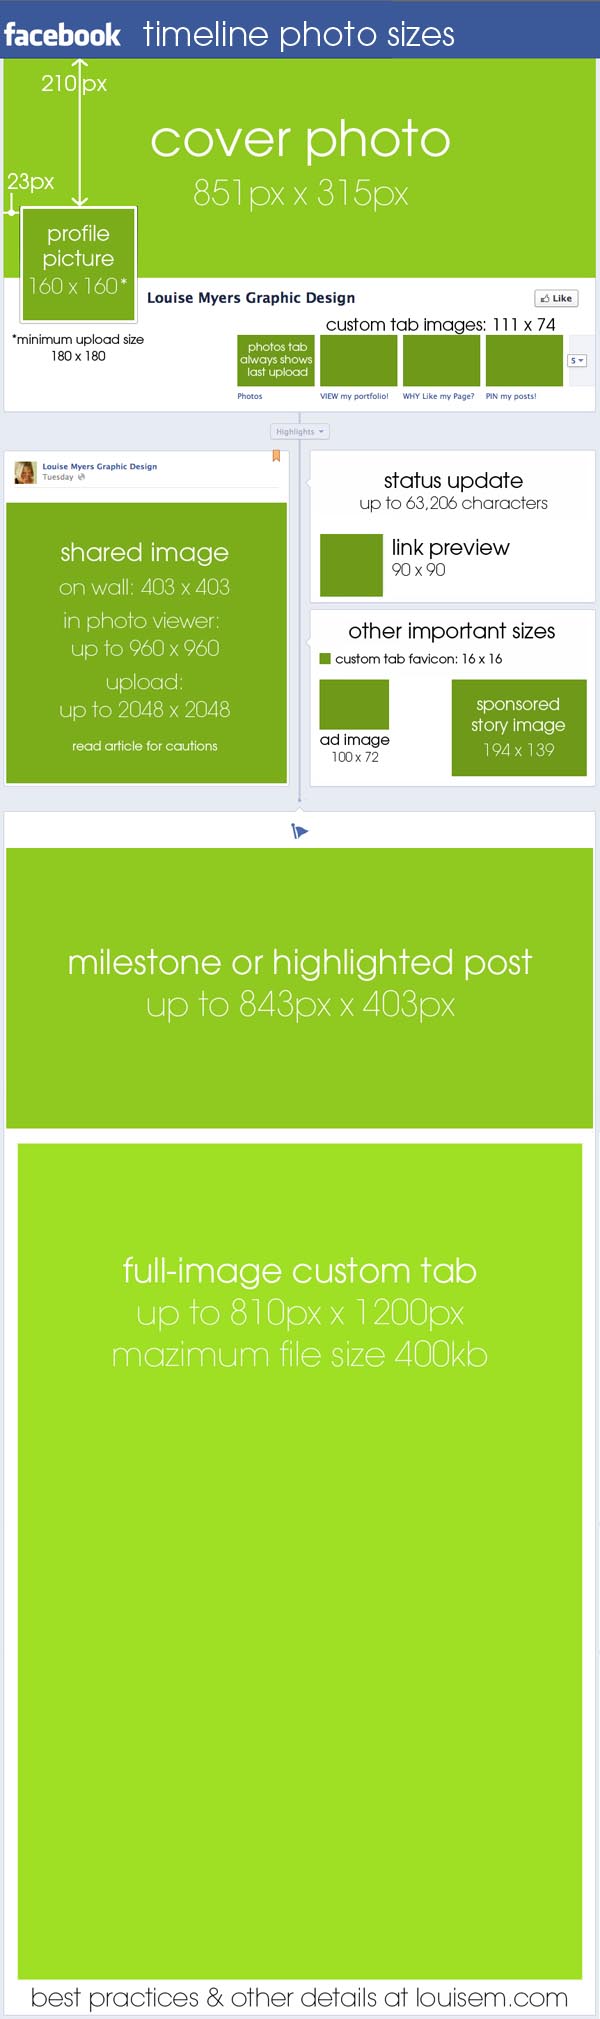 Facebook Photo Size Dimensions Infographic by Louise Myers